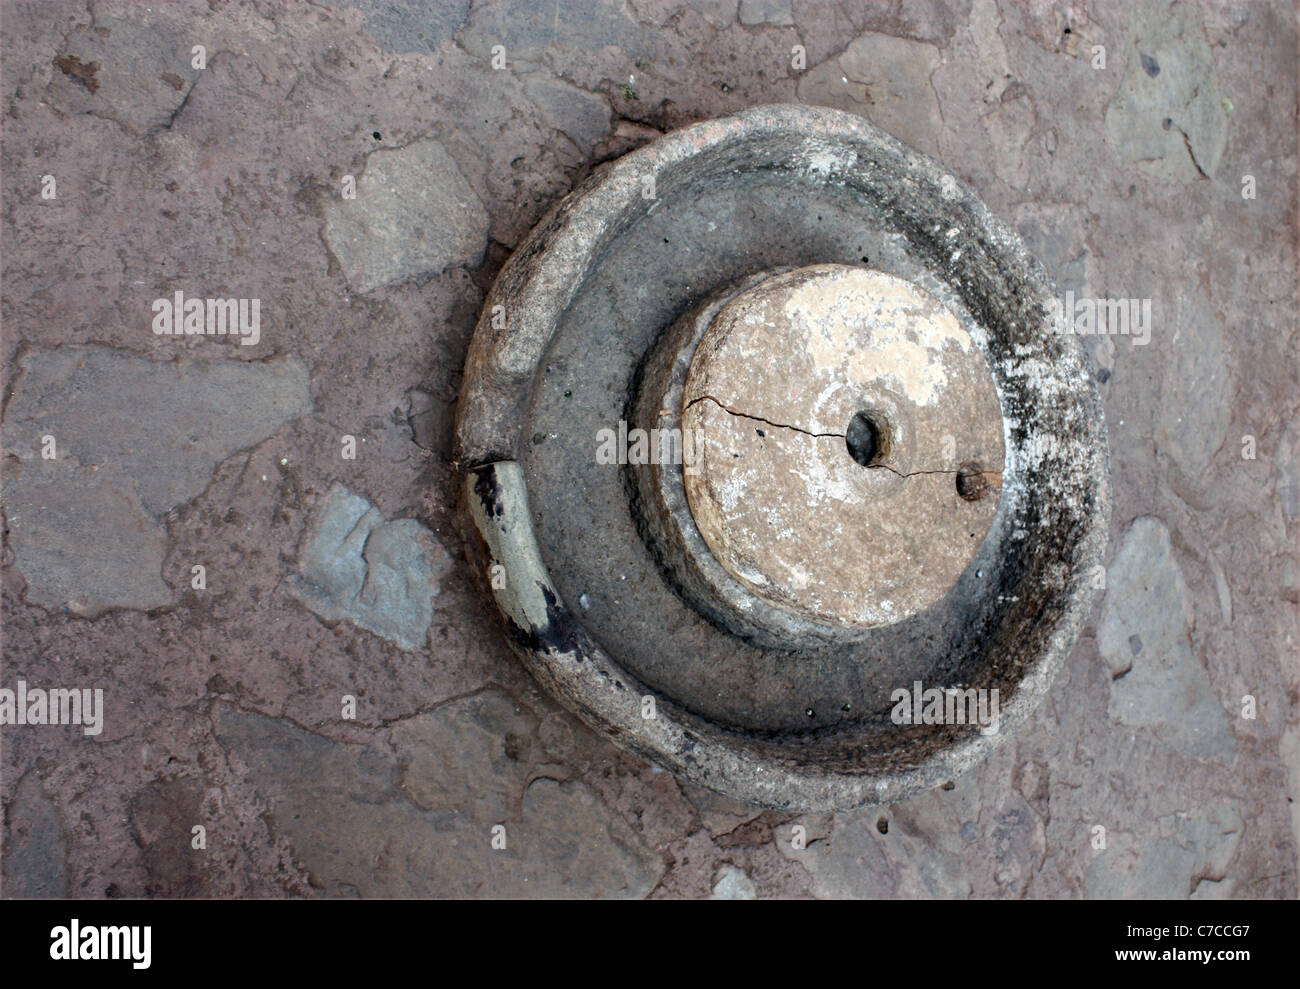 A rock hollow rotor for holding the hinge and rotating to grid flour Stock Photo